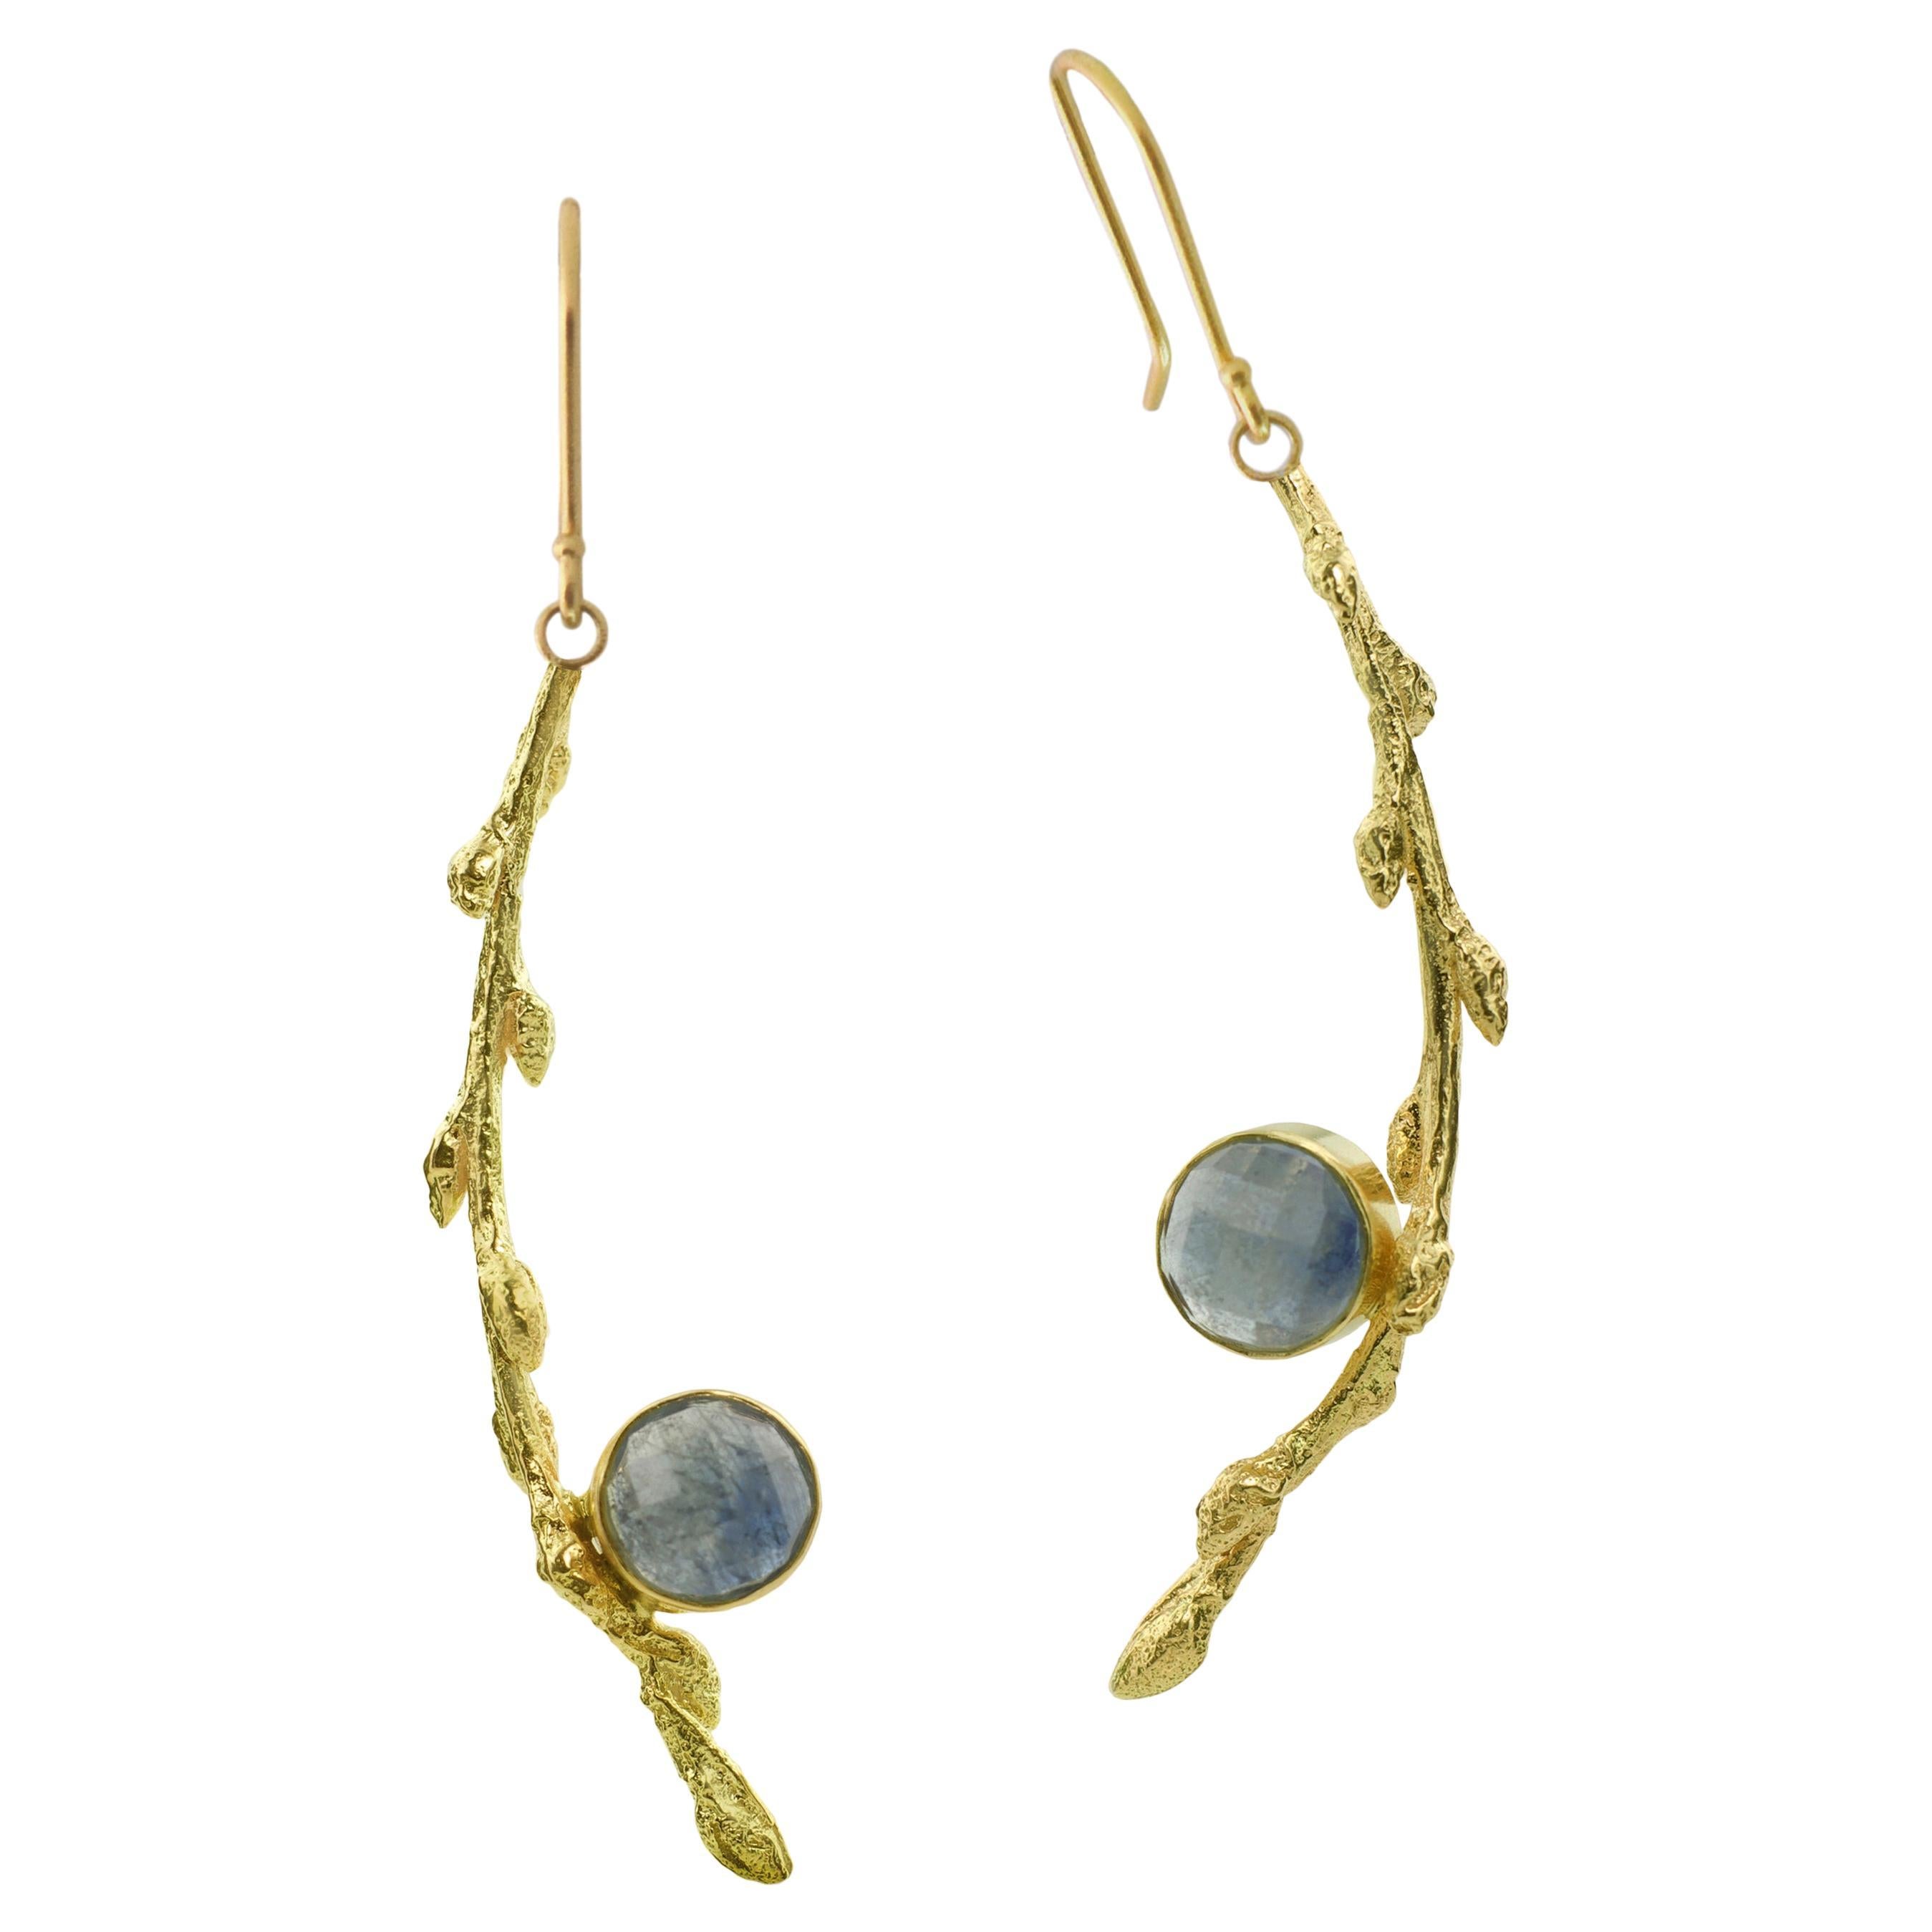 Susan Crow Studio Rose Cut Sapphires and Yellow Gold Branch Earrings